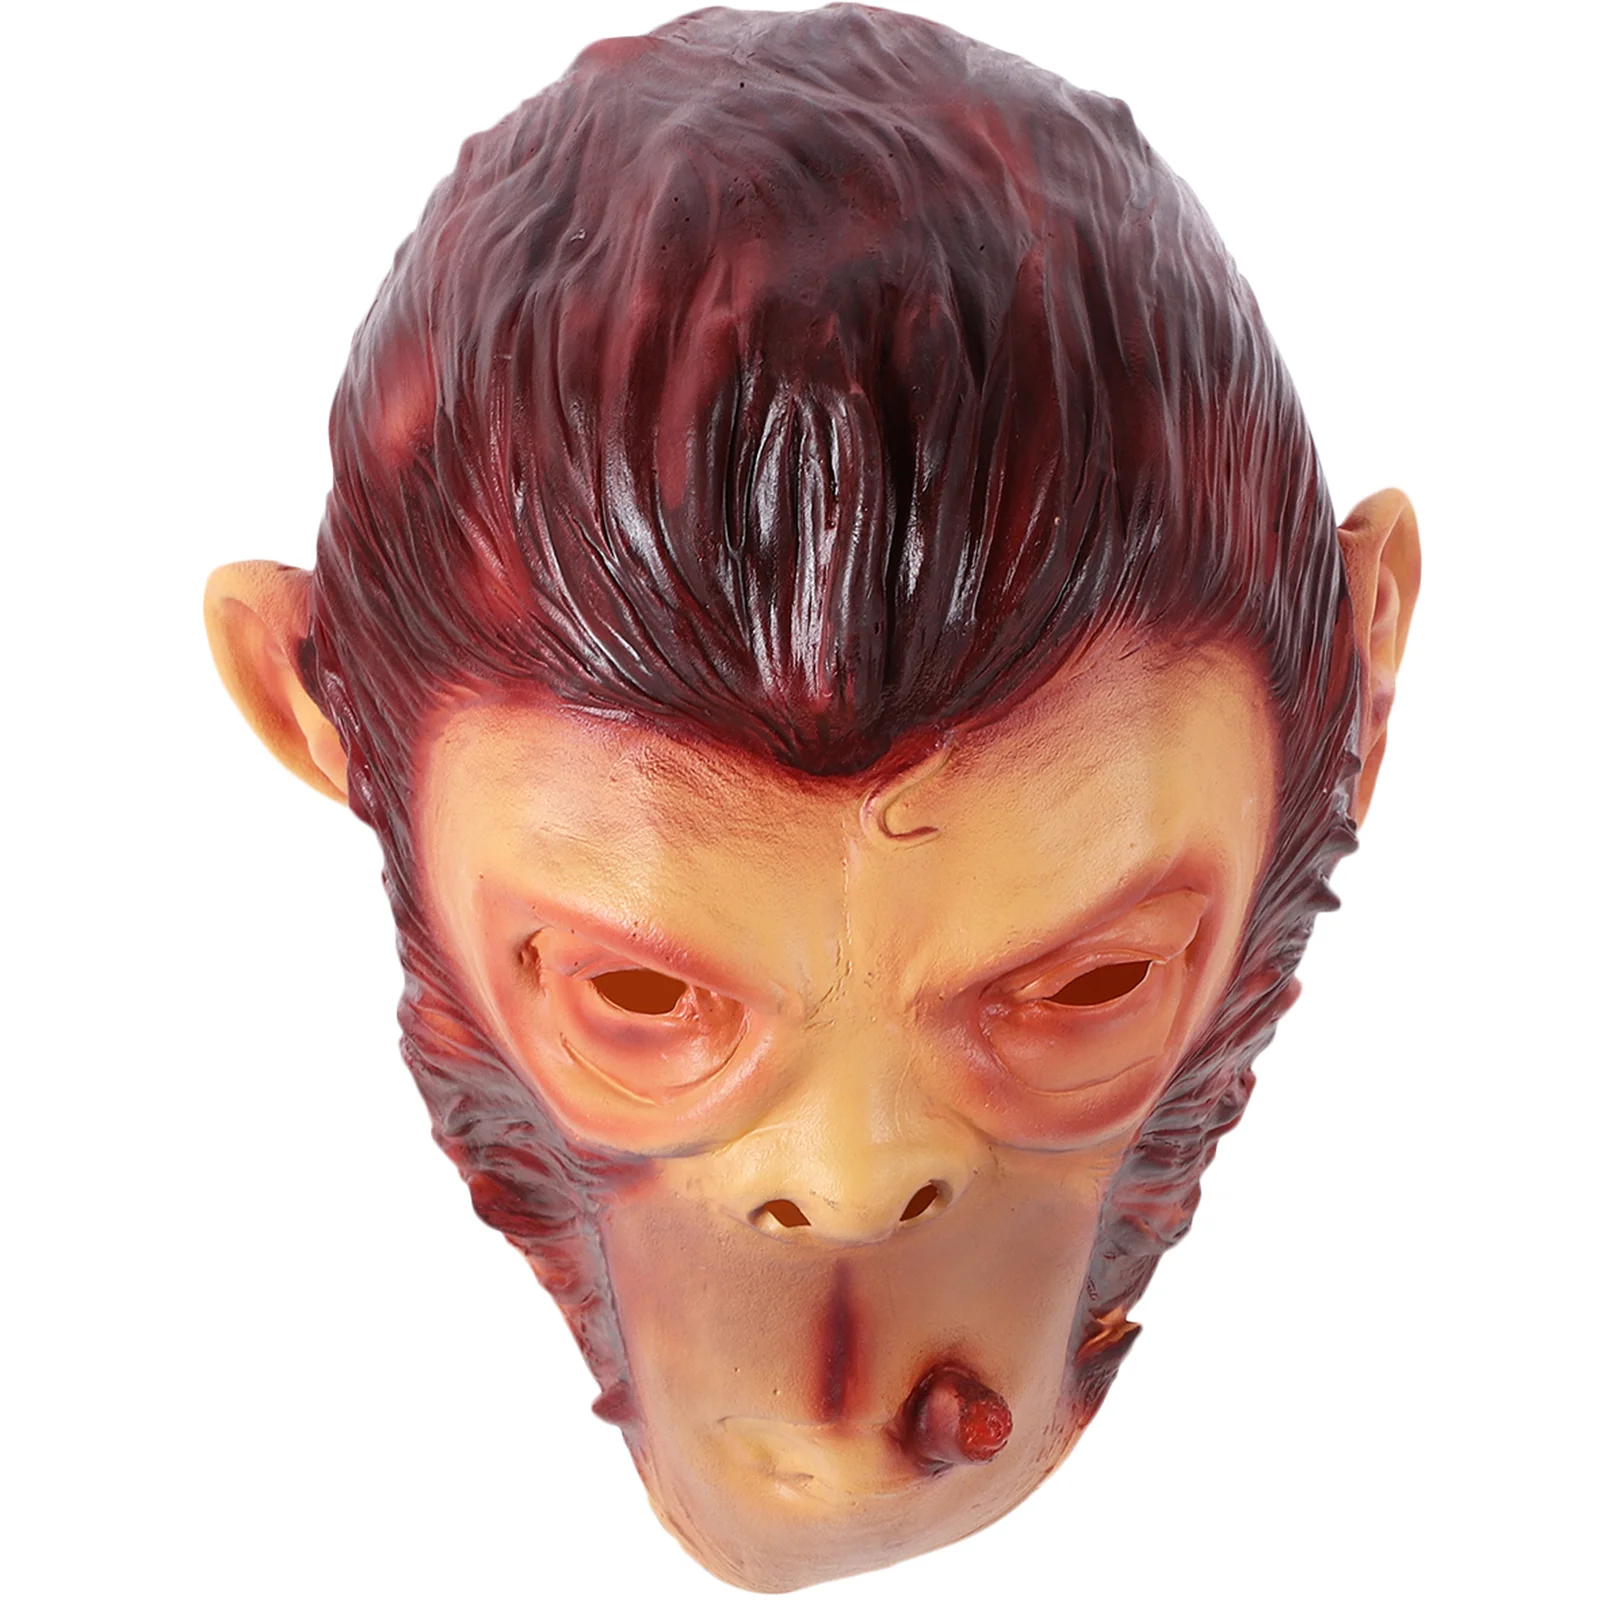 

Full Face Mask Latex Party Prop Prom Masquerade Halloween Scary Funny Monkey Headgear Masks